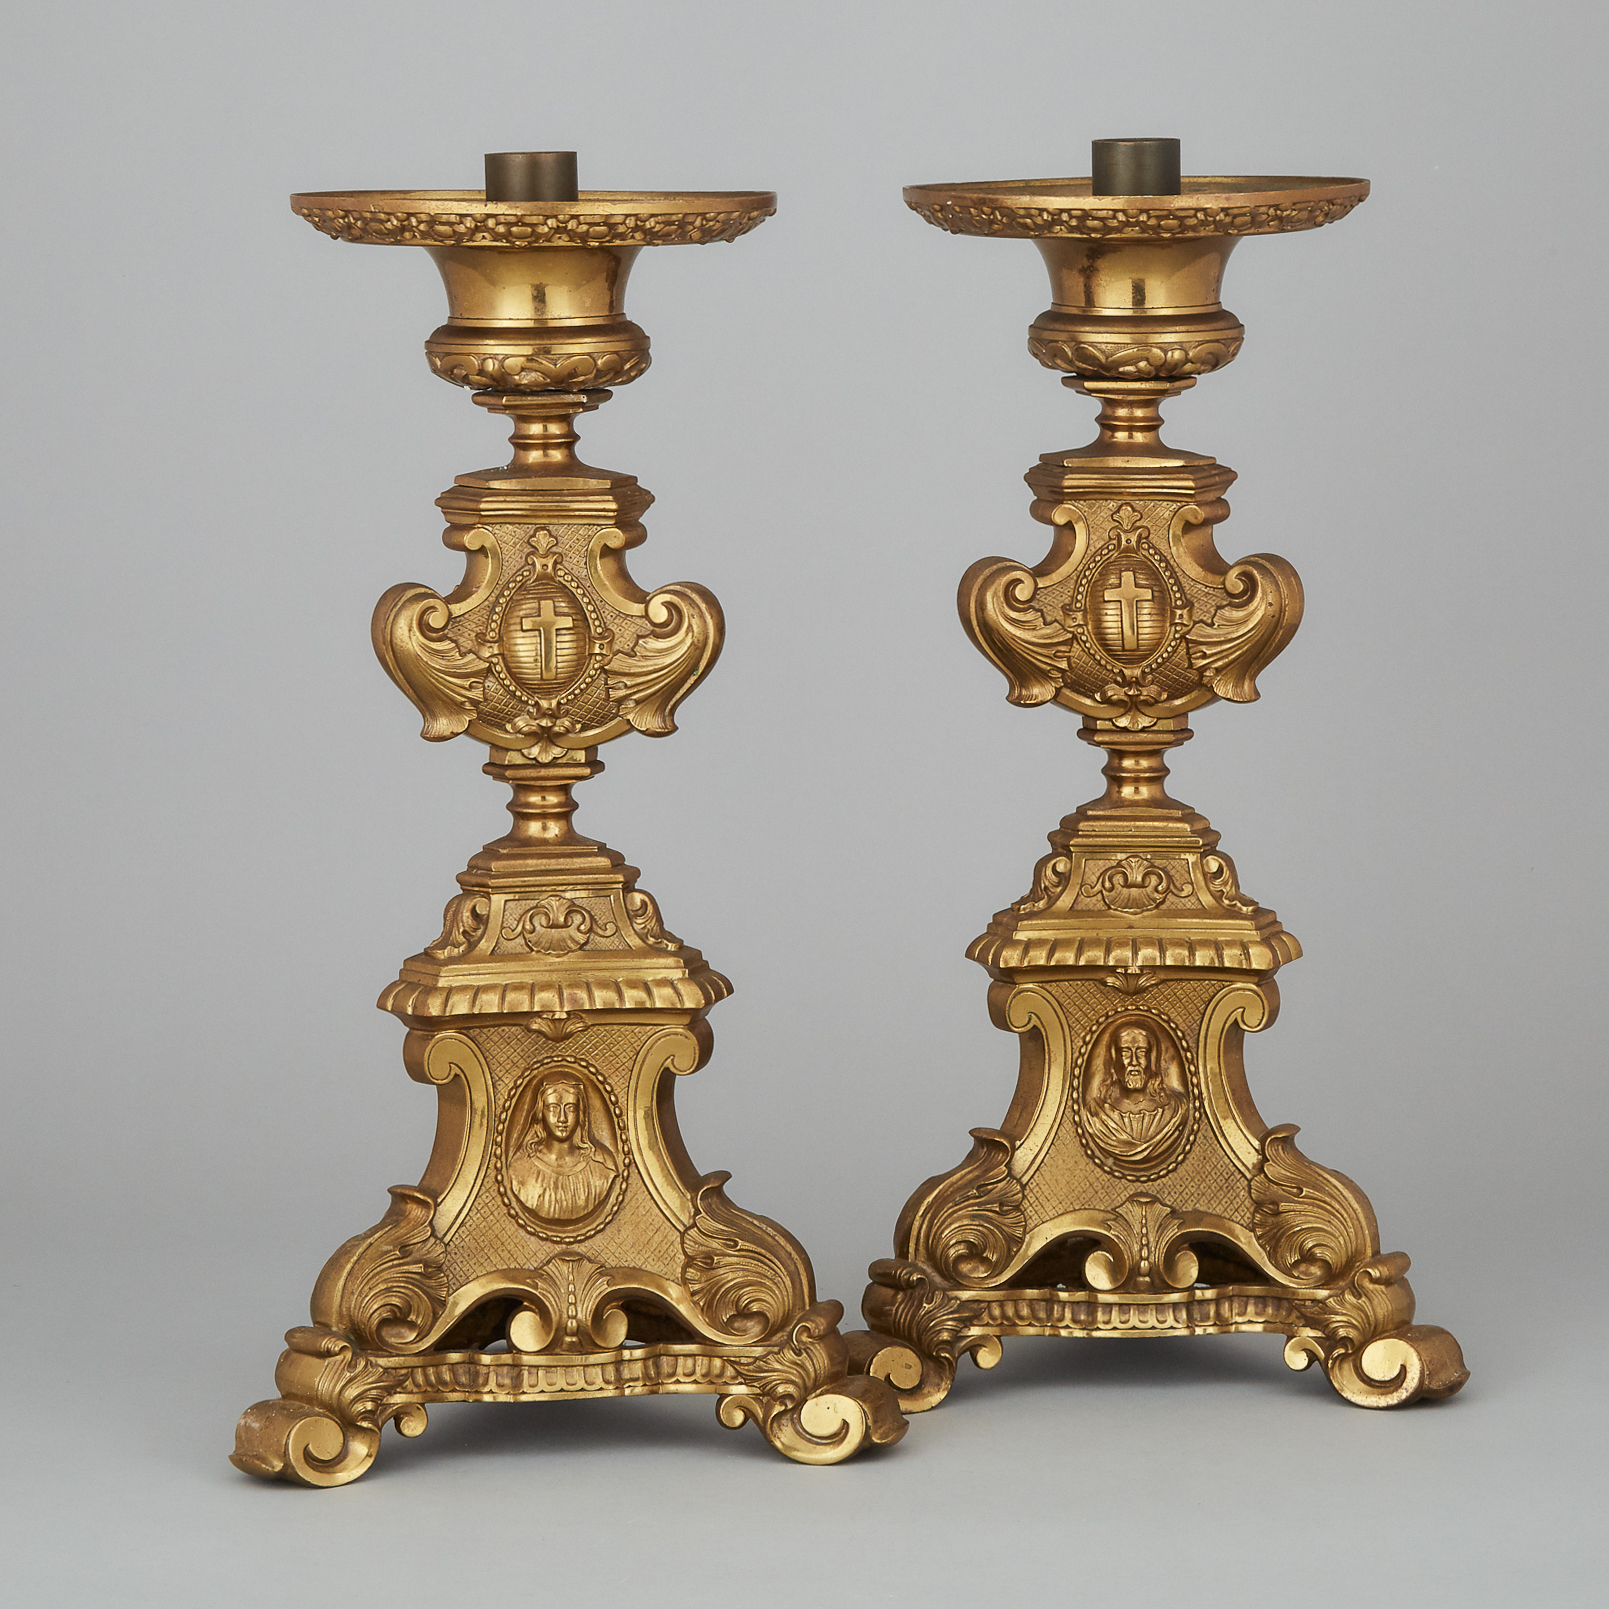 Pair of Large Ecclesiastical Lacquered Brass Pricket Style Candelsticks, 19th/early 20th century